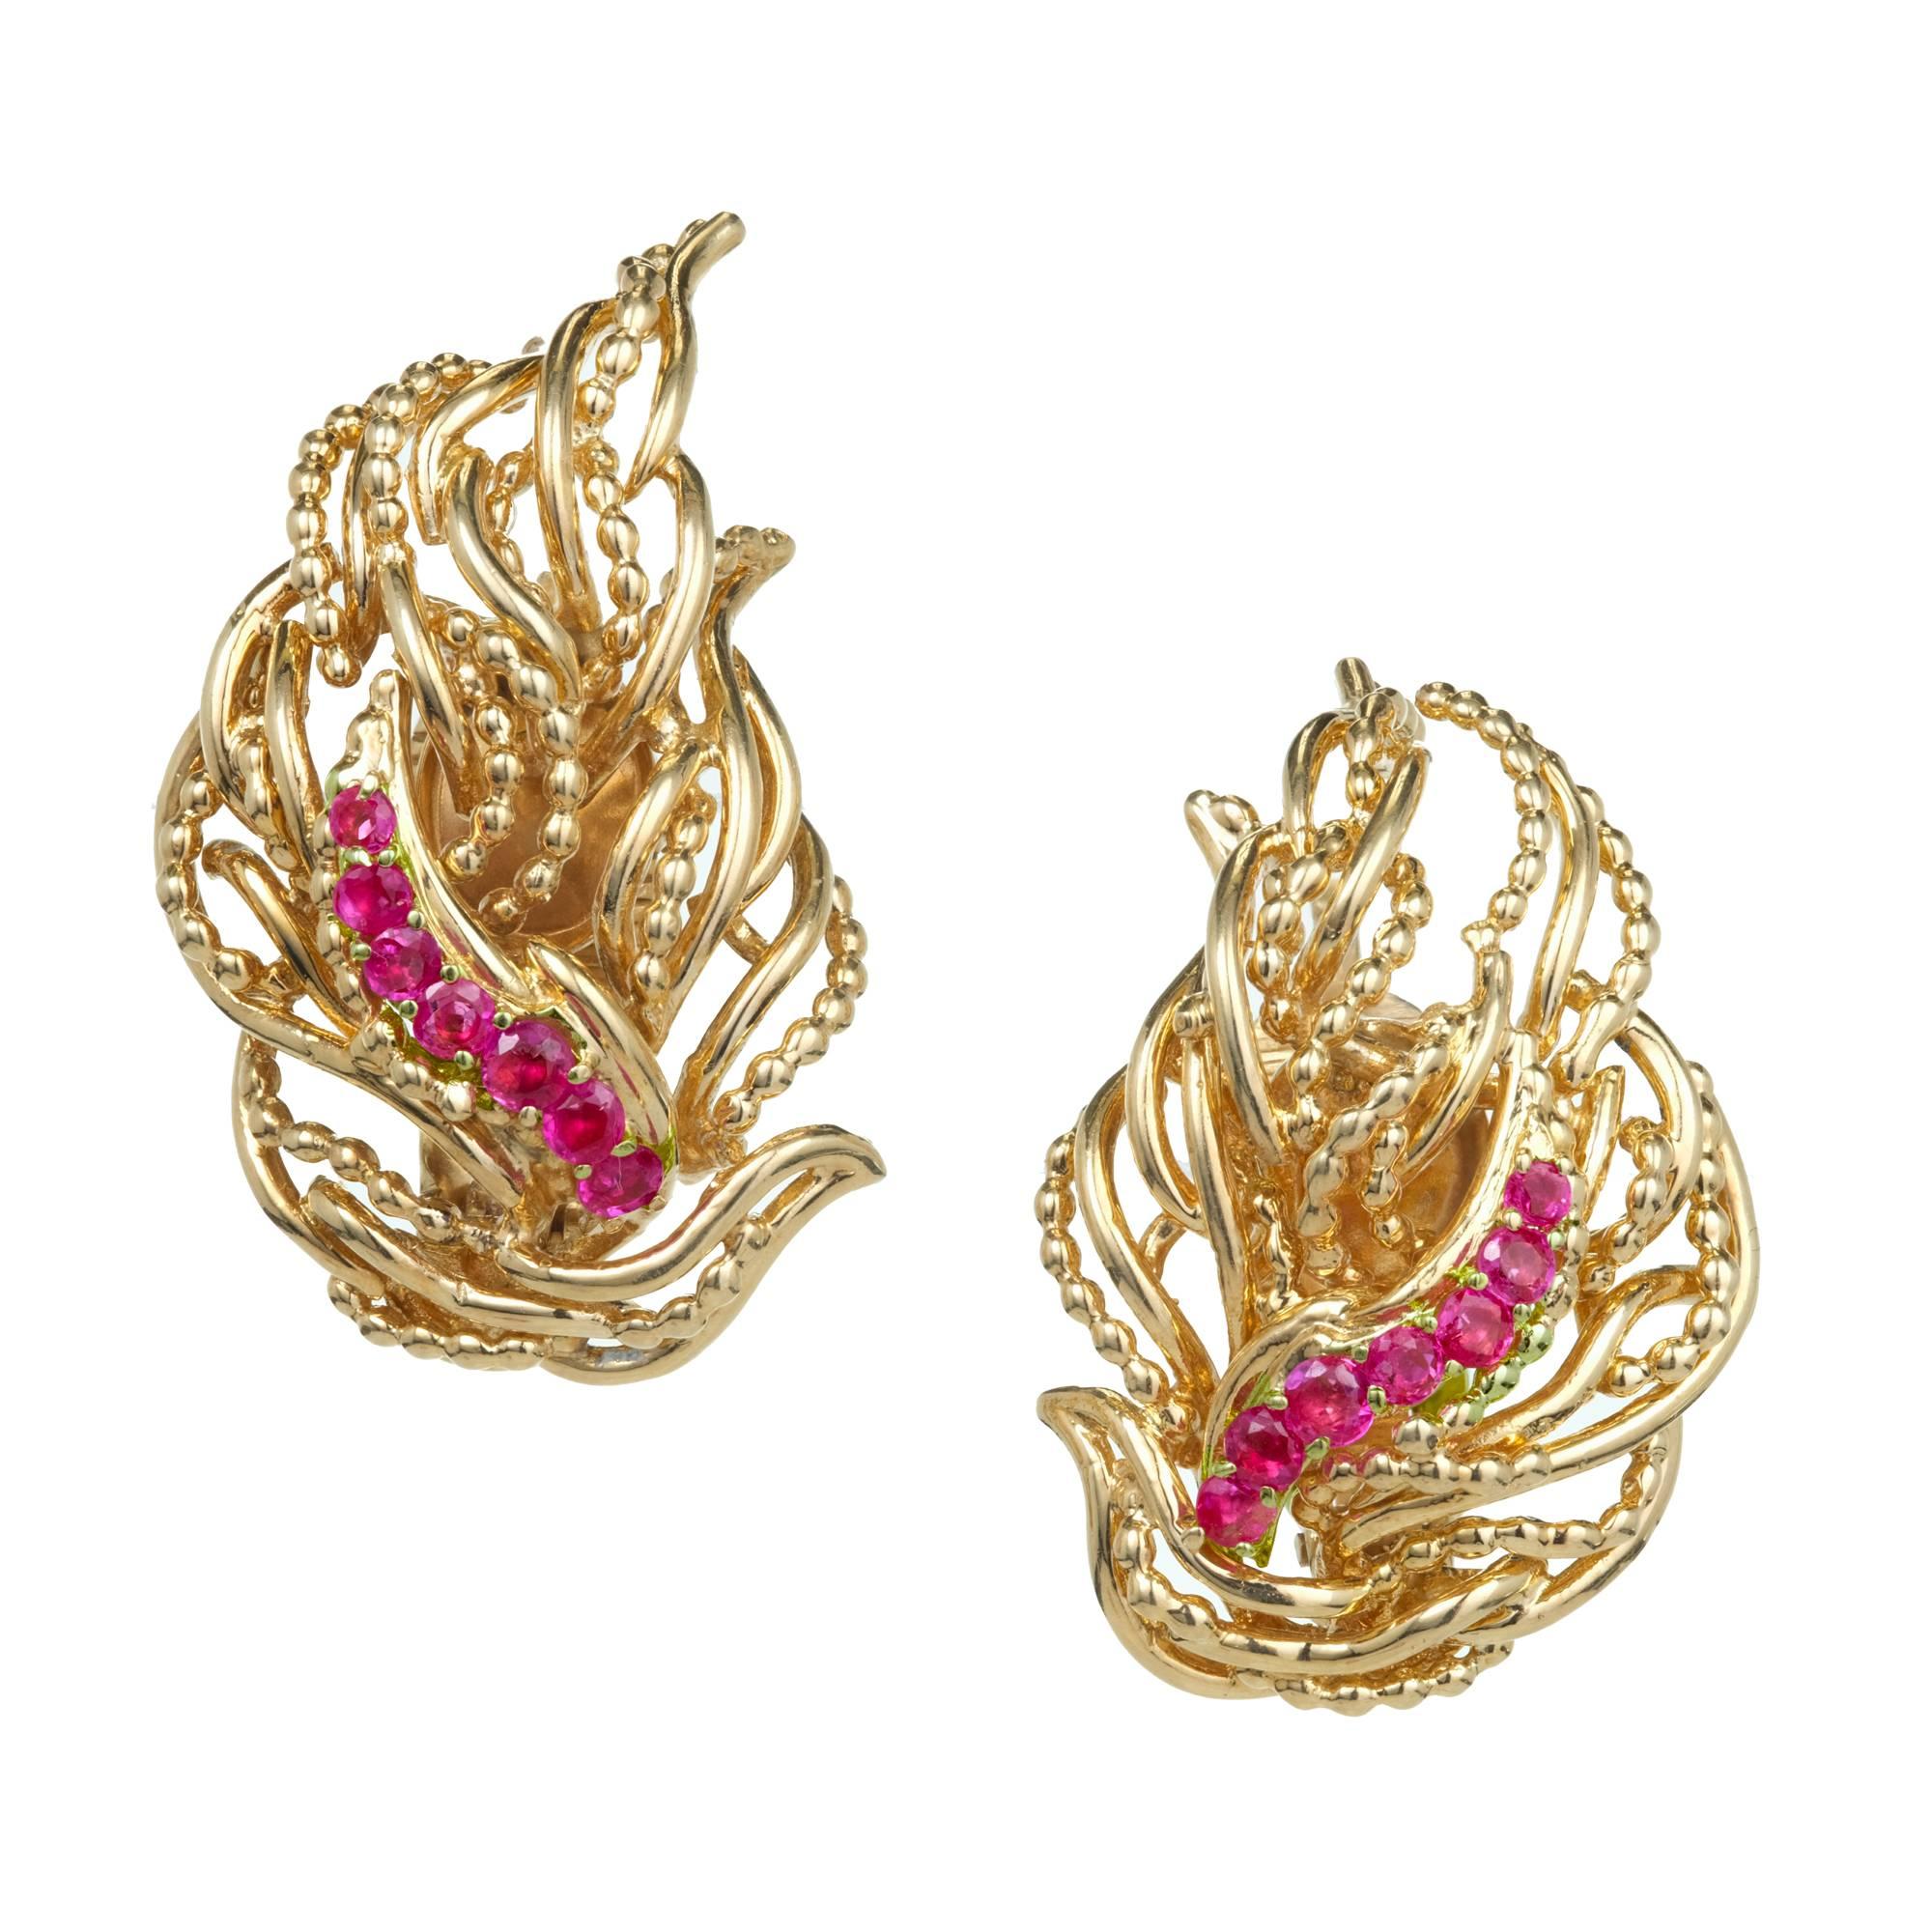 Tiffany & Co. Ruby Flame Gold Clip Post Earrings